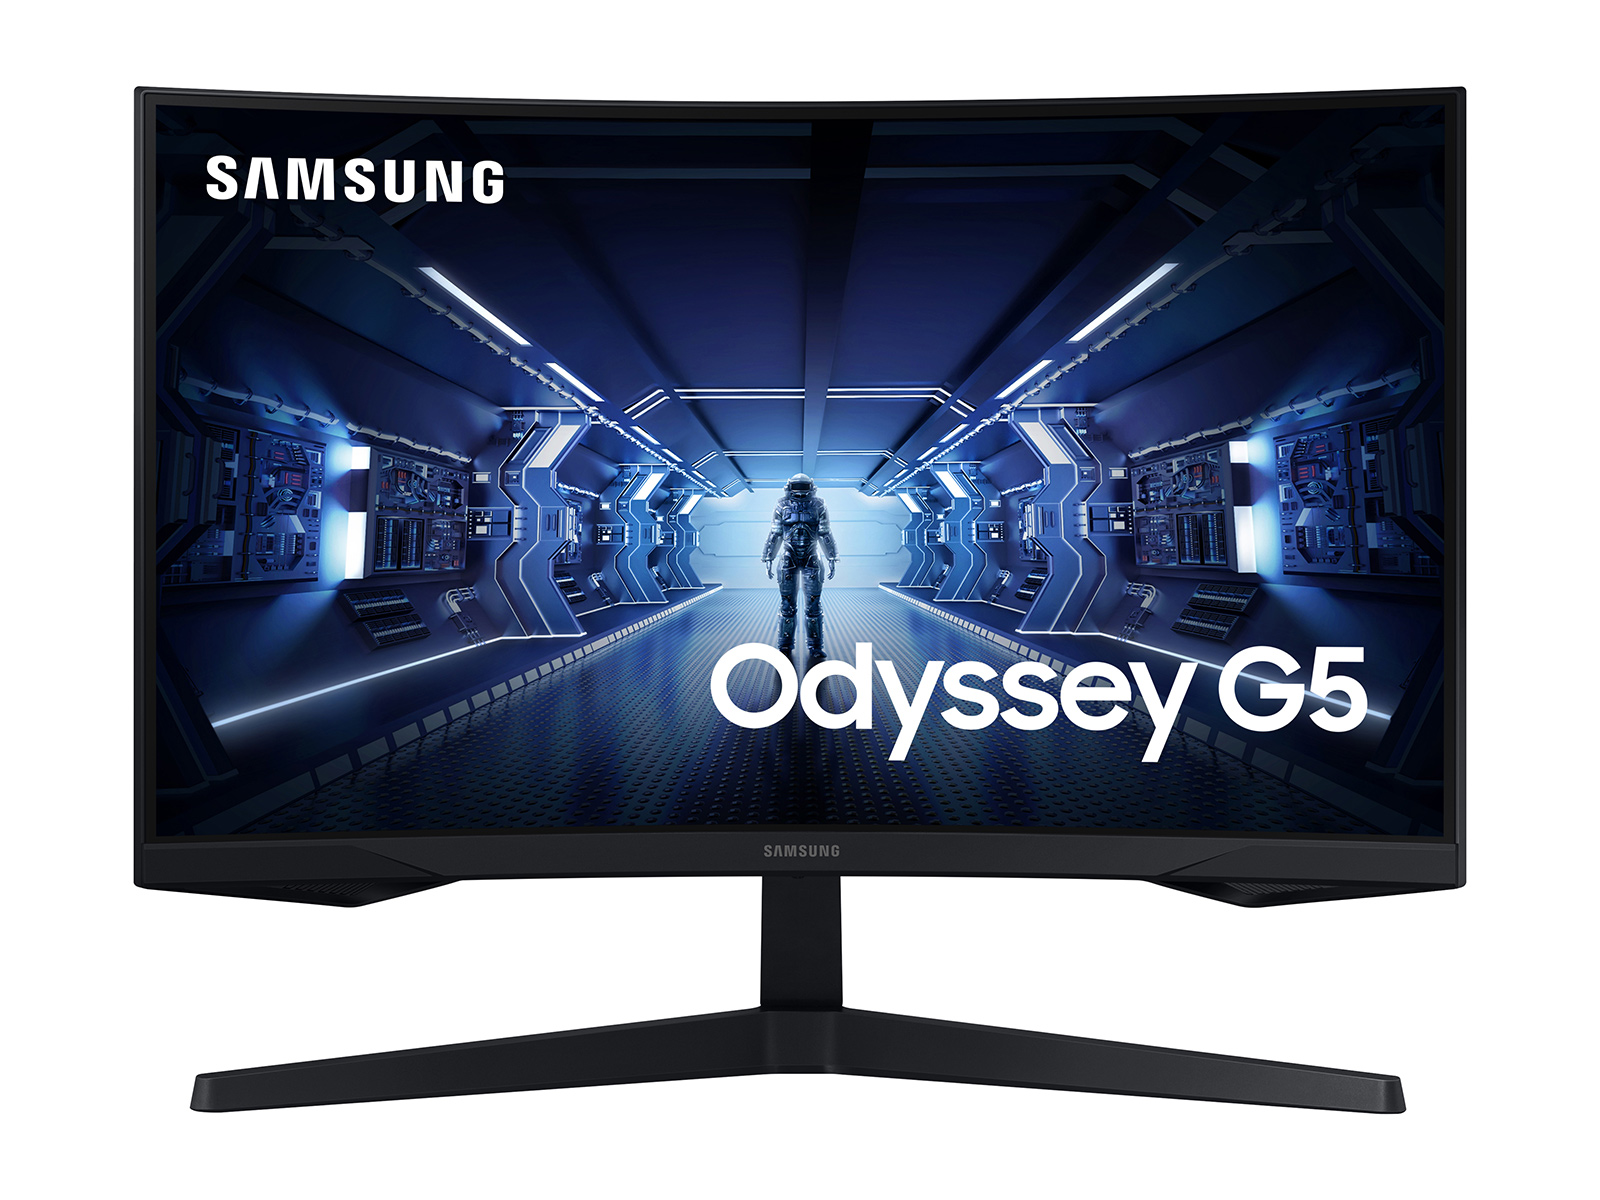 https://image-us.samsung.com/SamsungUS/home/computing/monitors/gaming-monitors/pdp/lc27g55tqwnxza/gallery/PDP-GALLERY-Odyssey-G5-01-1600x1200.jpg?$product-details-zoomed-png$